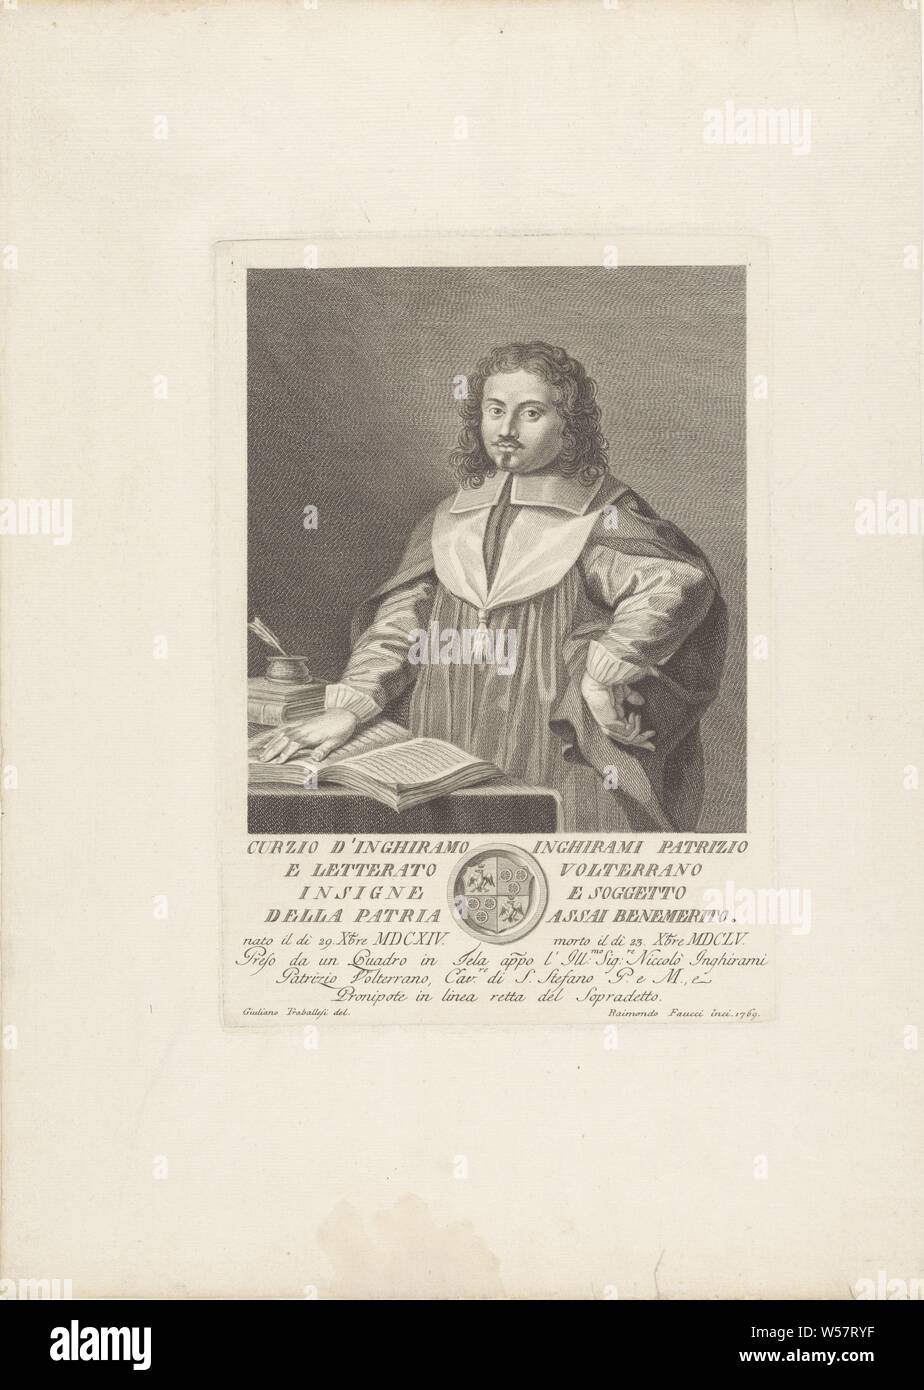 Portrait of Inghiramo Inghirami Portraits of famous Italians with a coat of arms in a lower margin (series title), historical persons, Inghiramo Inghirami, Raimondo Faucci (mentioned on object), Italy, 1769, paper, engraving, h 293 mm × w 205 mm Stock Photo